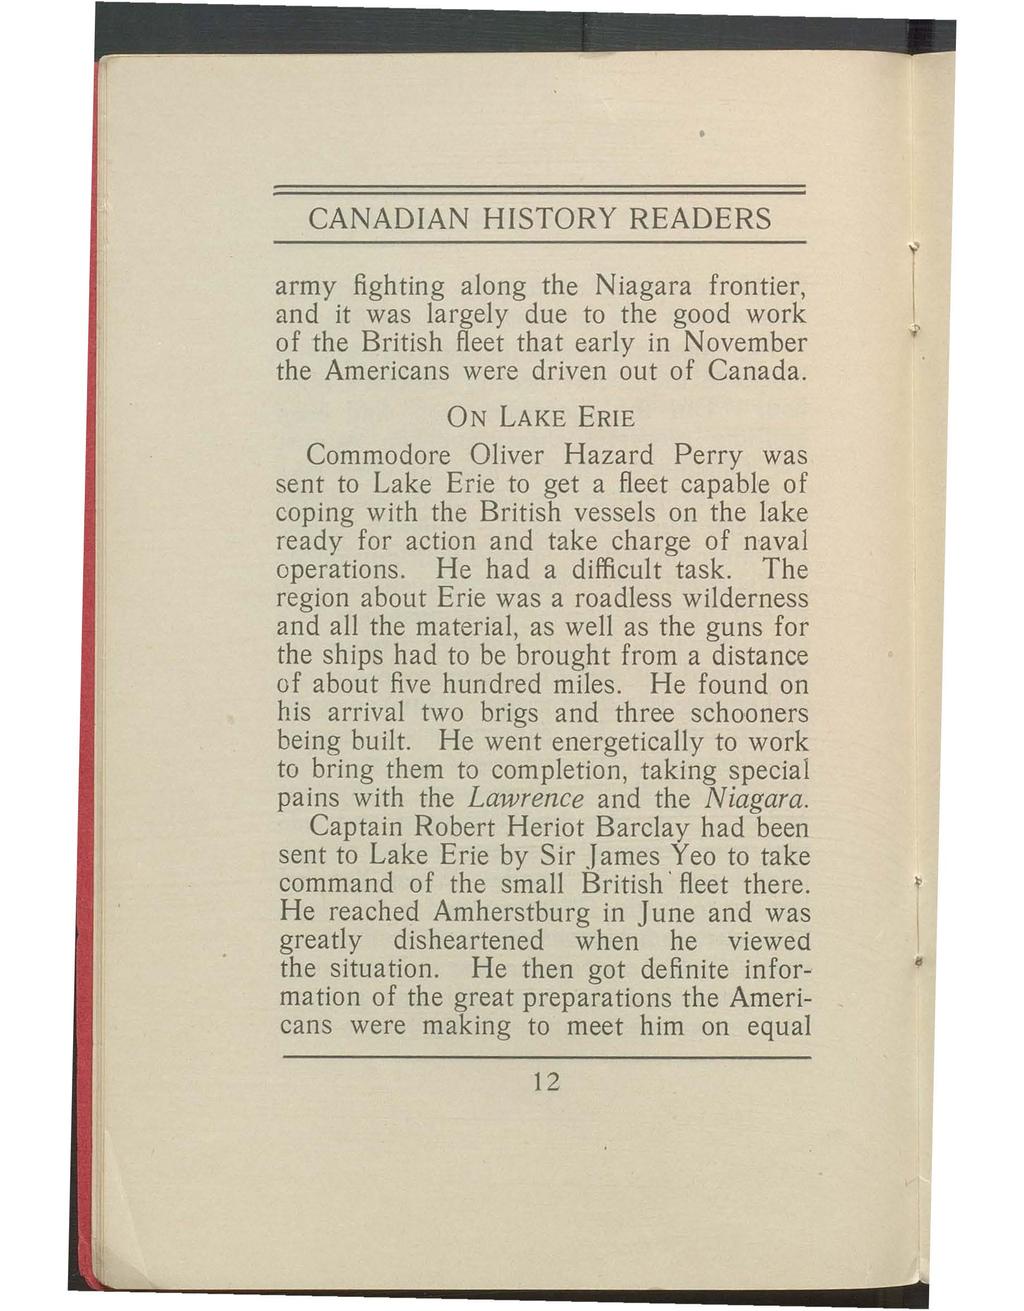 CANADIAN HISTORY READERS army fighting along the Niagara frontier, and it was largely due to the good work of the British fleet that early in November the Americans were driven out of Canada.